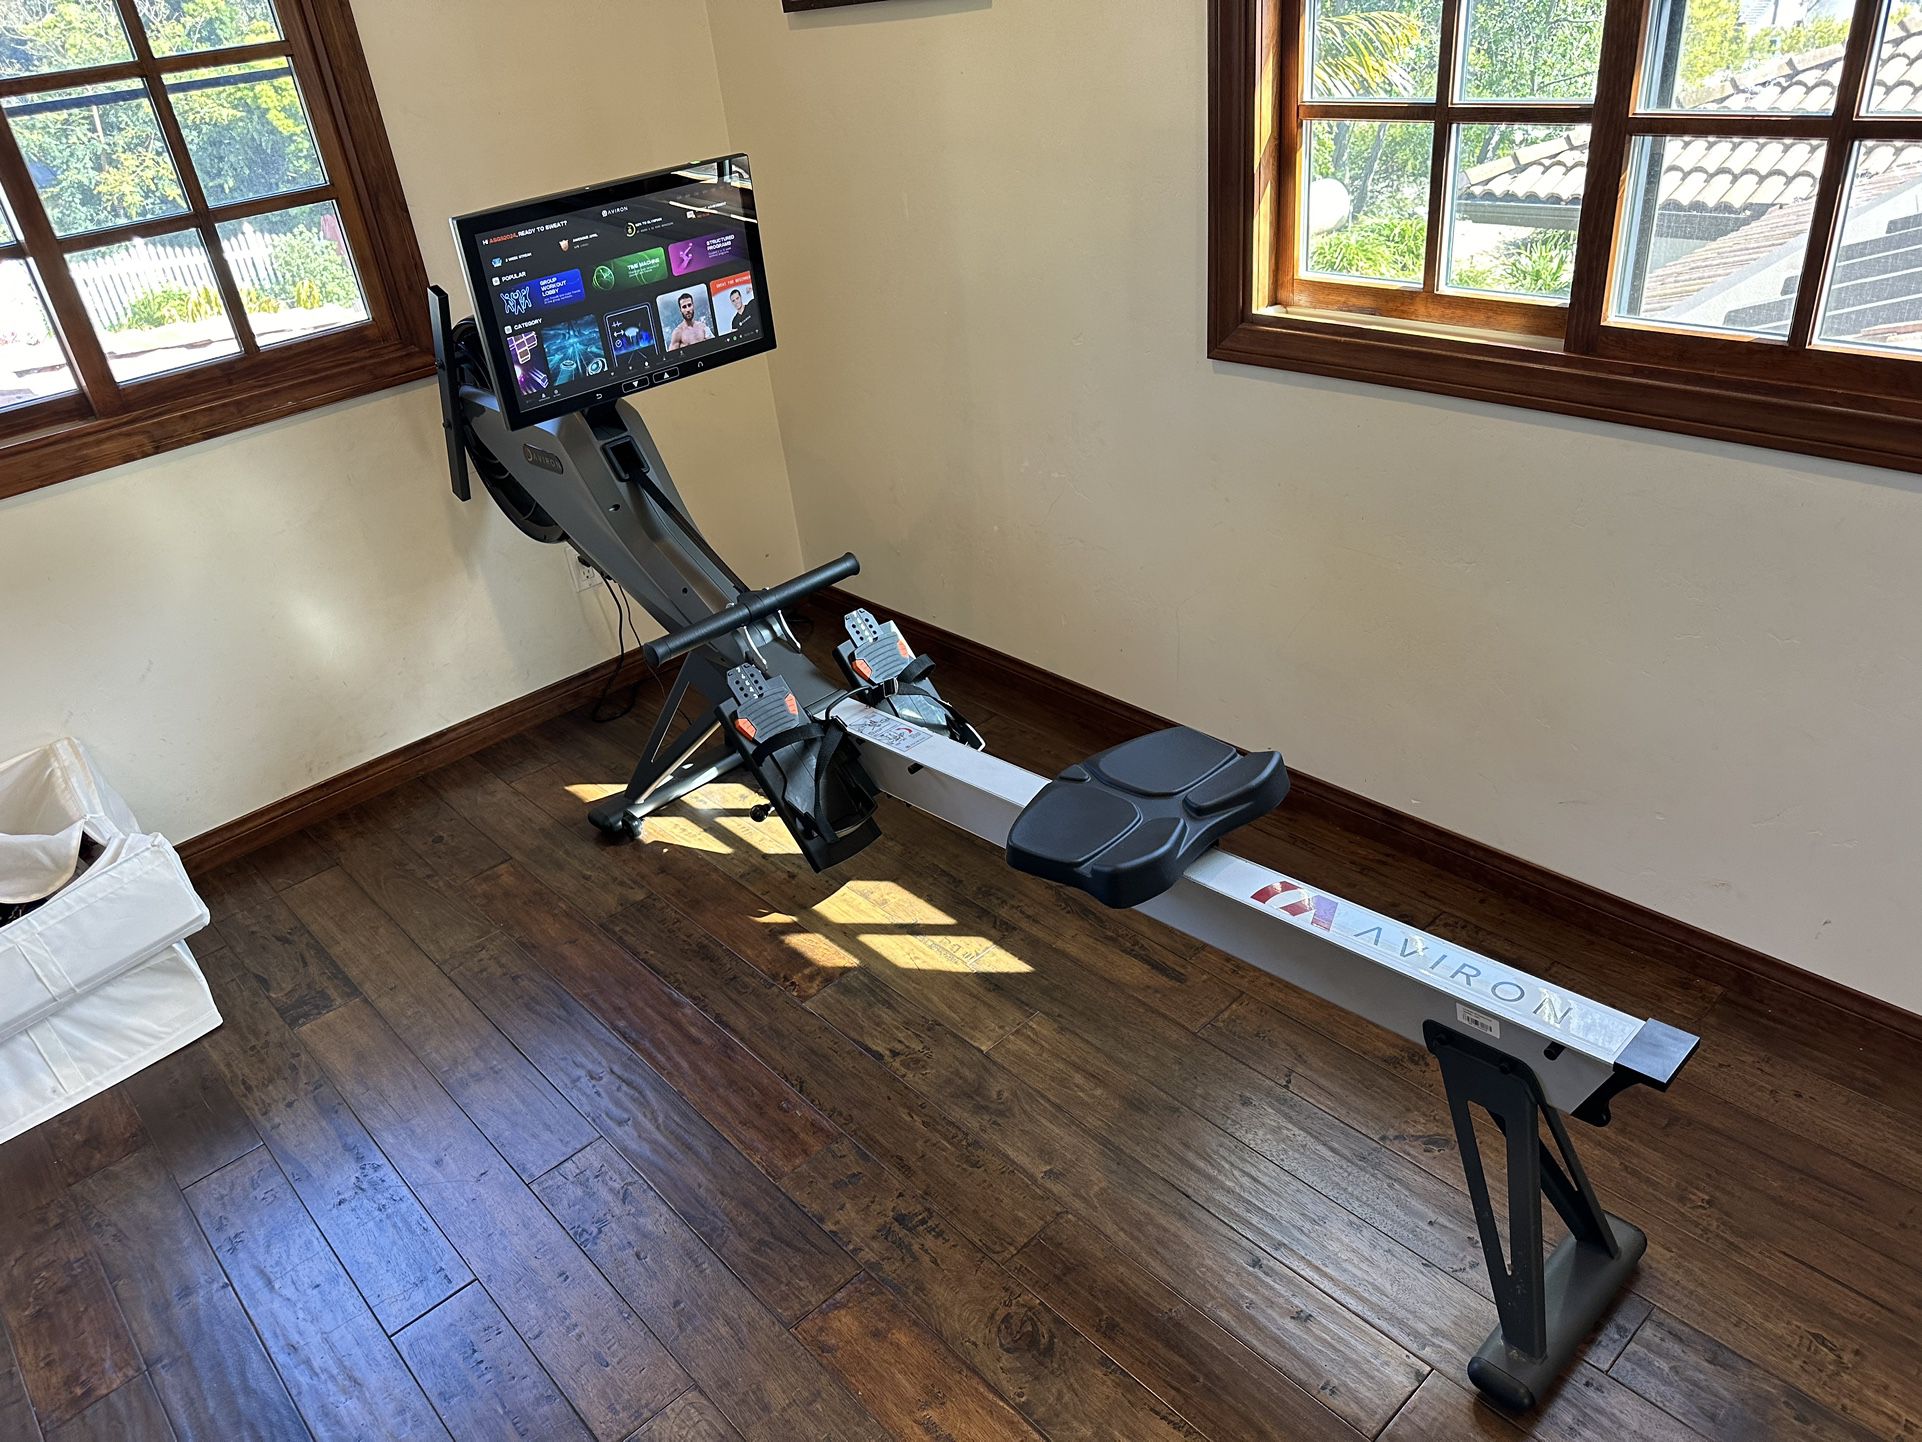  Price Drop Aviron Impact Series Lightweight Rowing Machine With Video Games And Streaming 